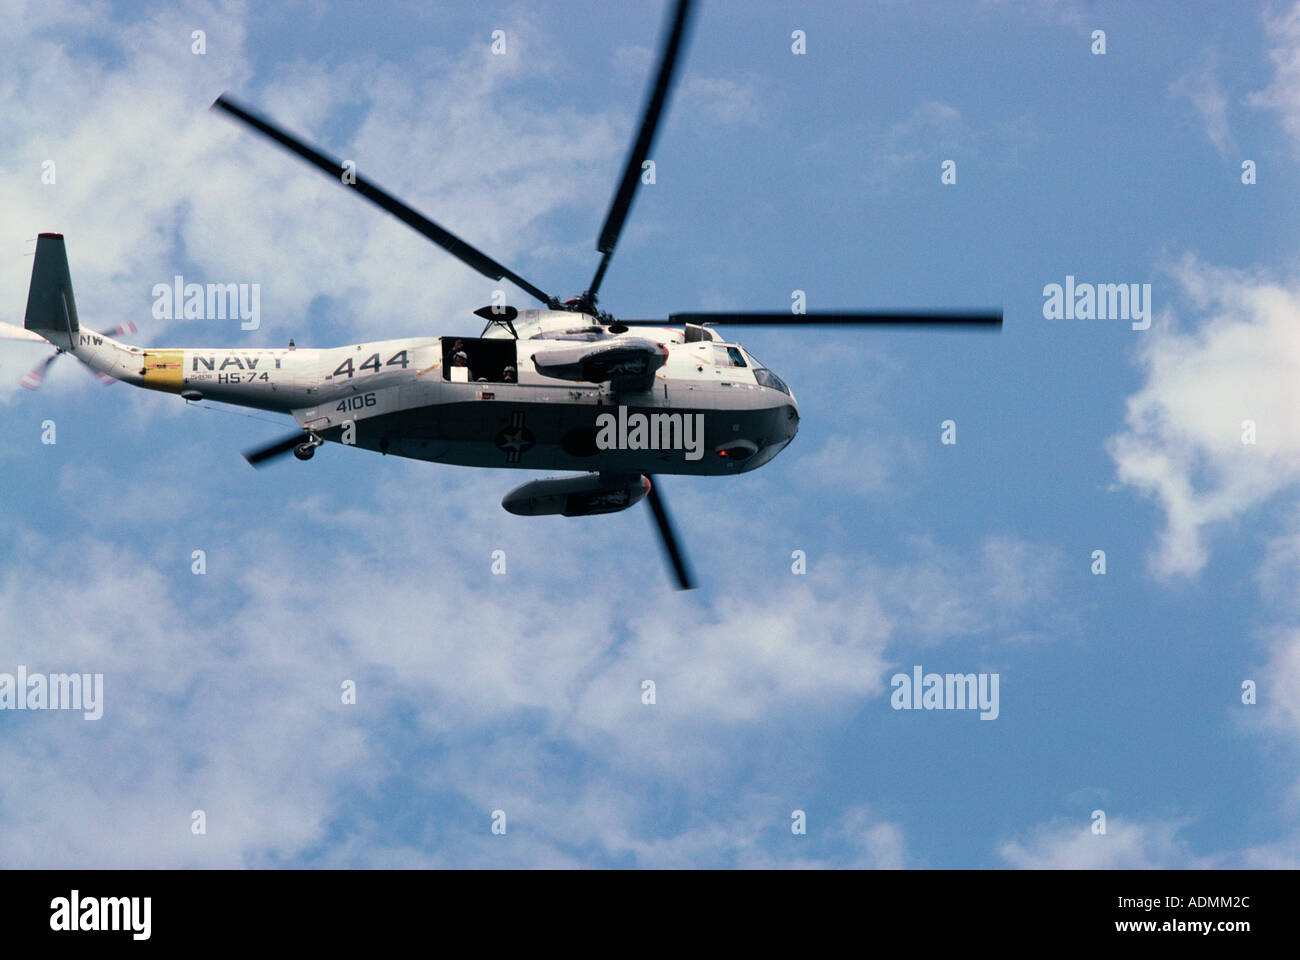 Low angle view of a military helicopter in flight Stock Photo